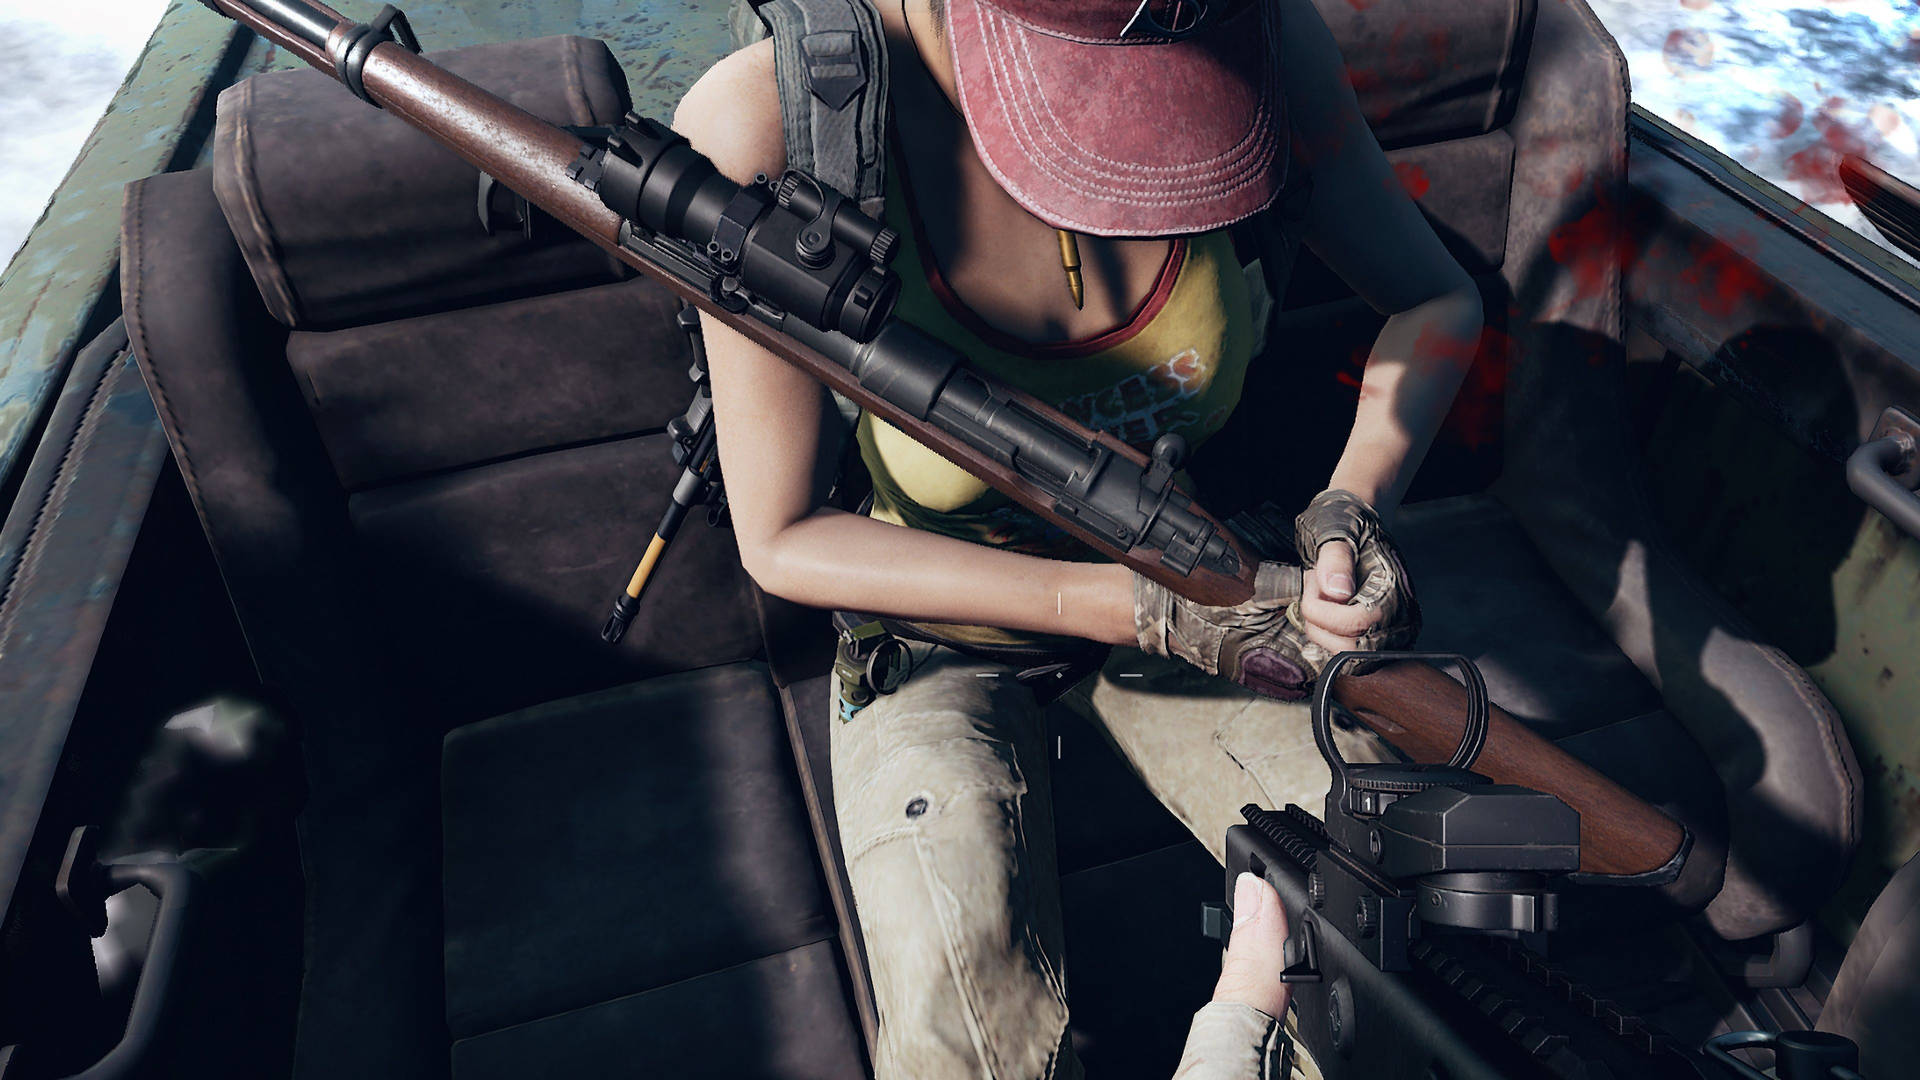 Players come together in Playerunknown's Battlegrounds in stunning 4K graphics. Wallpaper